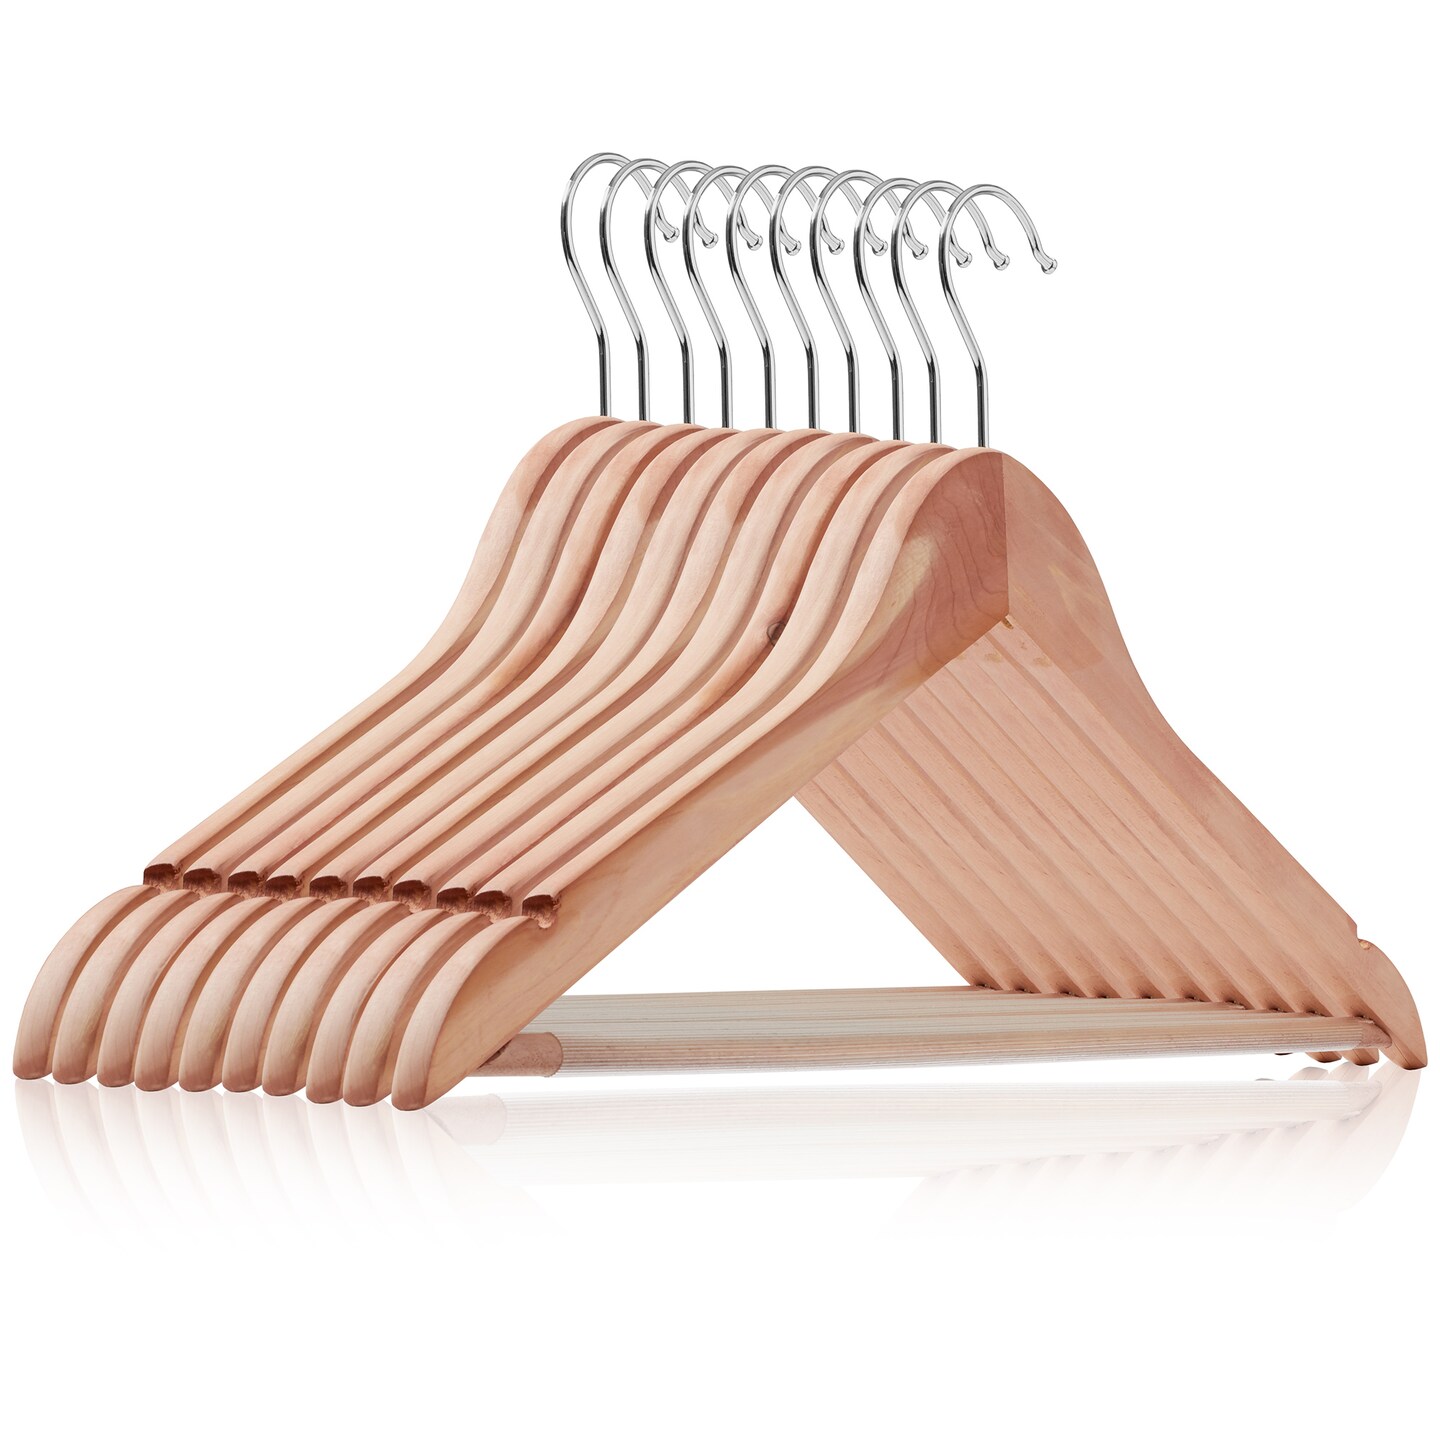 Casafield - Red Cedar Wooden Suit Hangers with Smooth Finish, Notches, and  Swivel Hook - Natural Wood Hangers for Clothes, Coats, Pants, Shirts,  Skirts